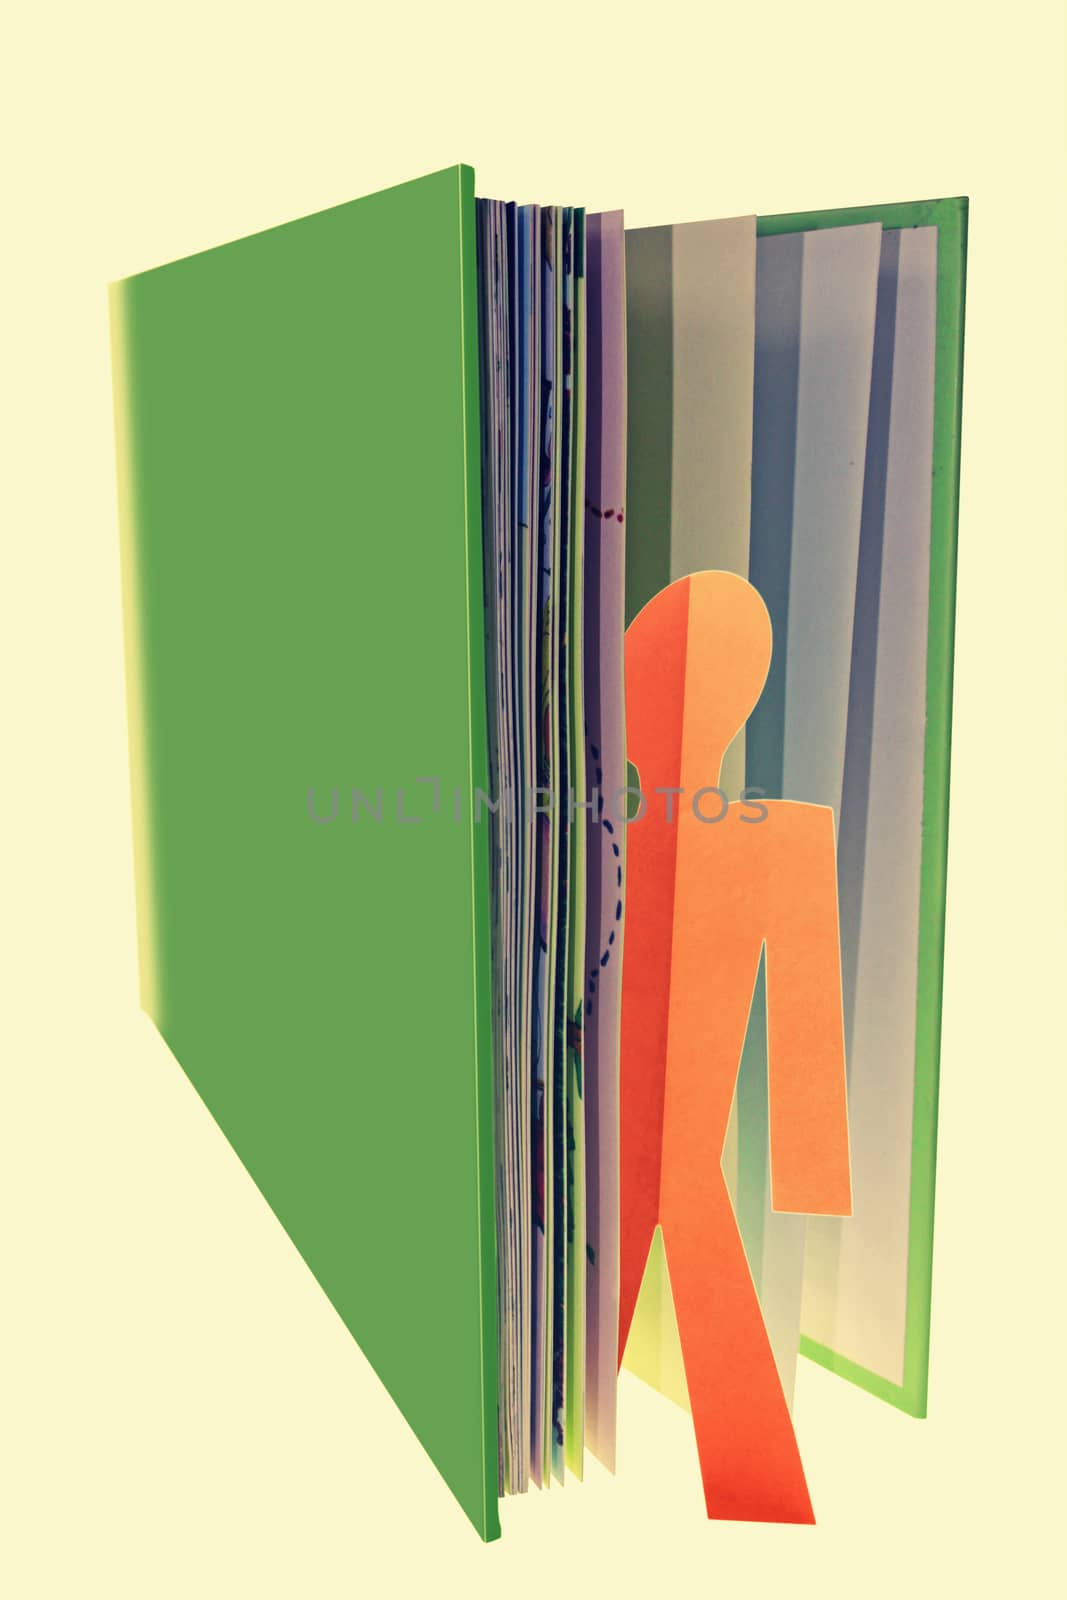 man coming out of book, Concept by yands